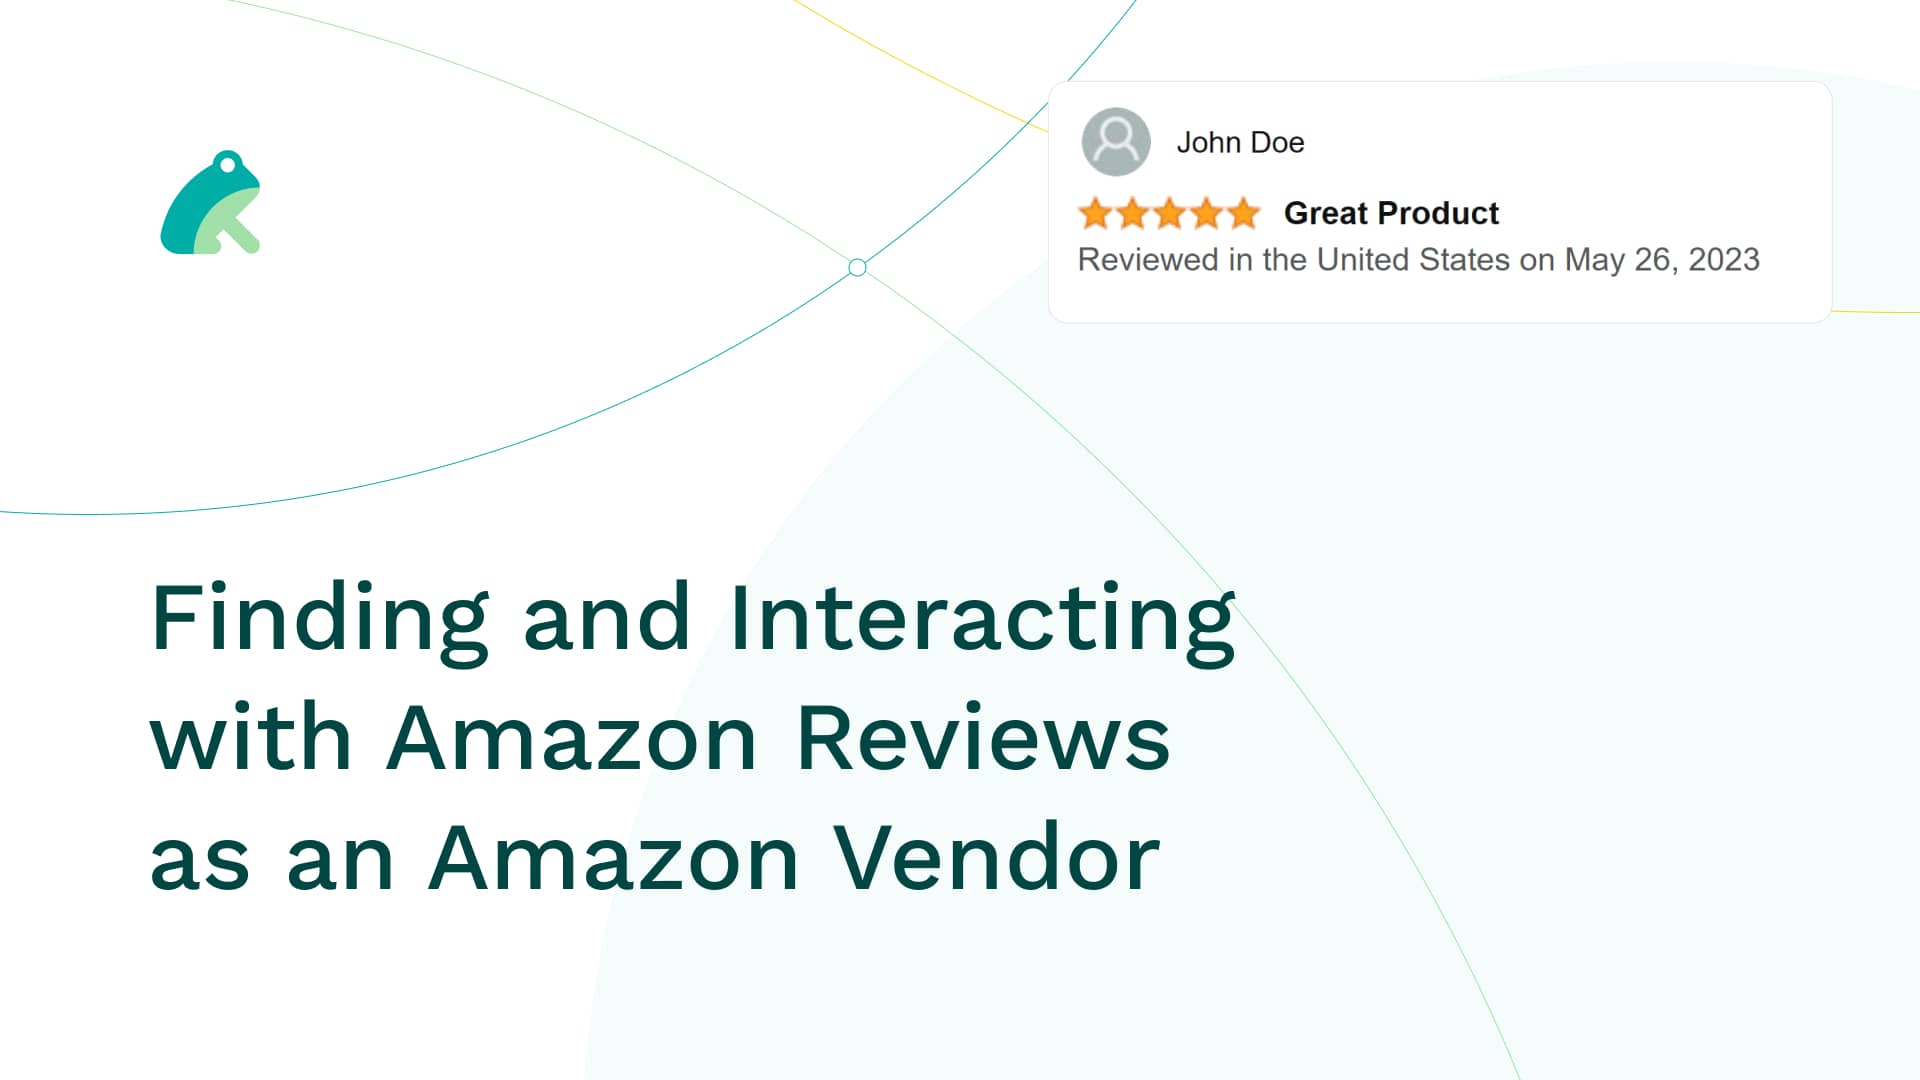 Finding and Interacting with Amazon Reviews as an Amazon Vendor